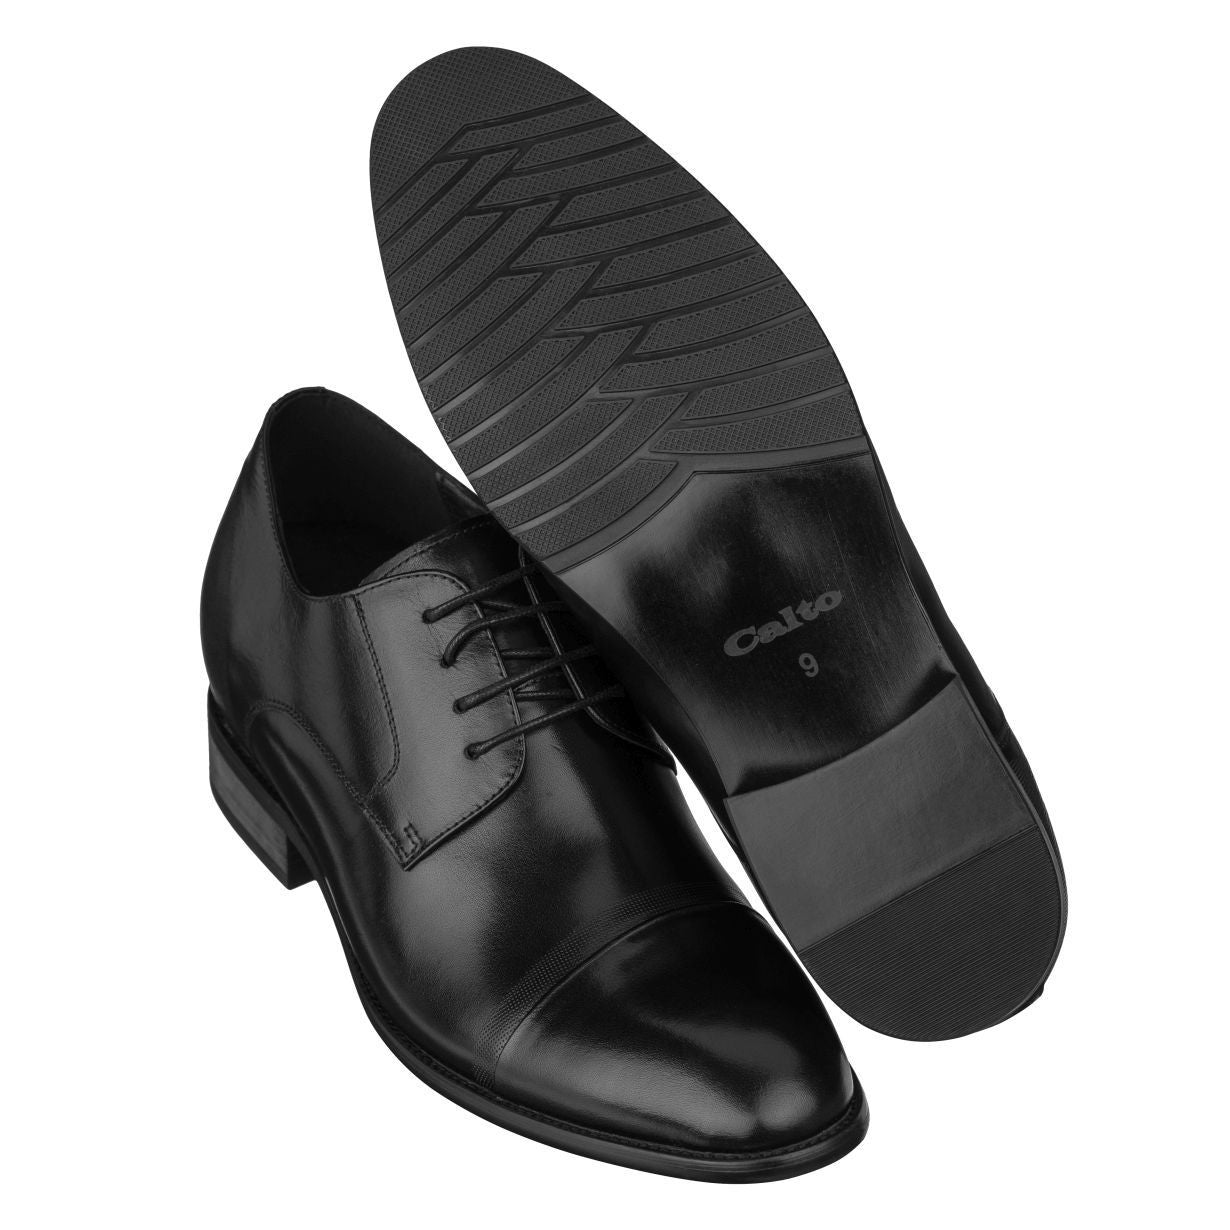 Elevator shoes height increase CALTO Black Formal Dress Shoes - Three Inches - Y1004